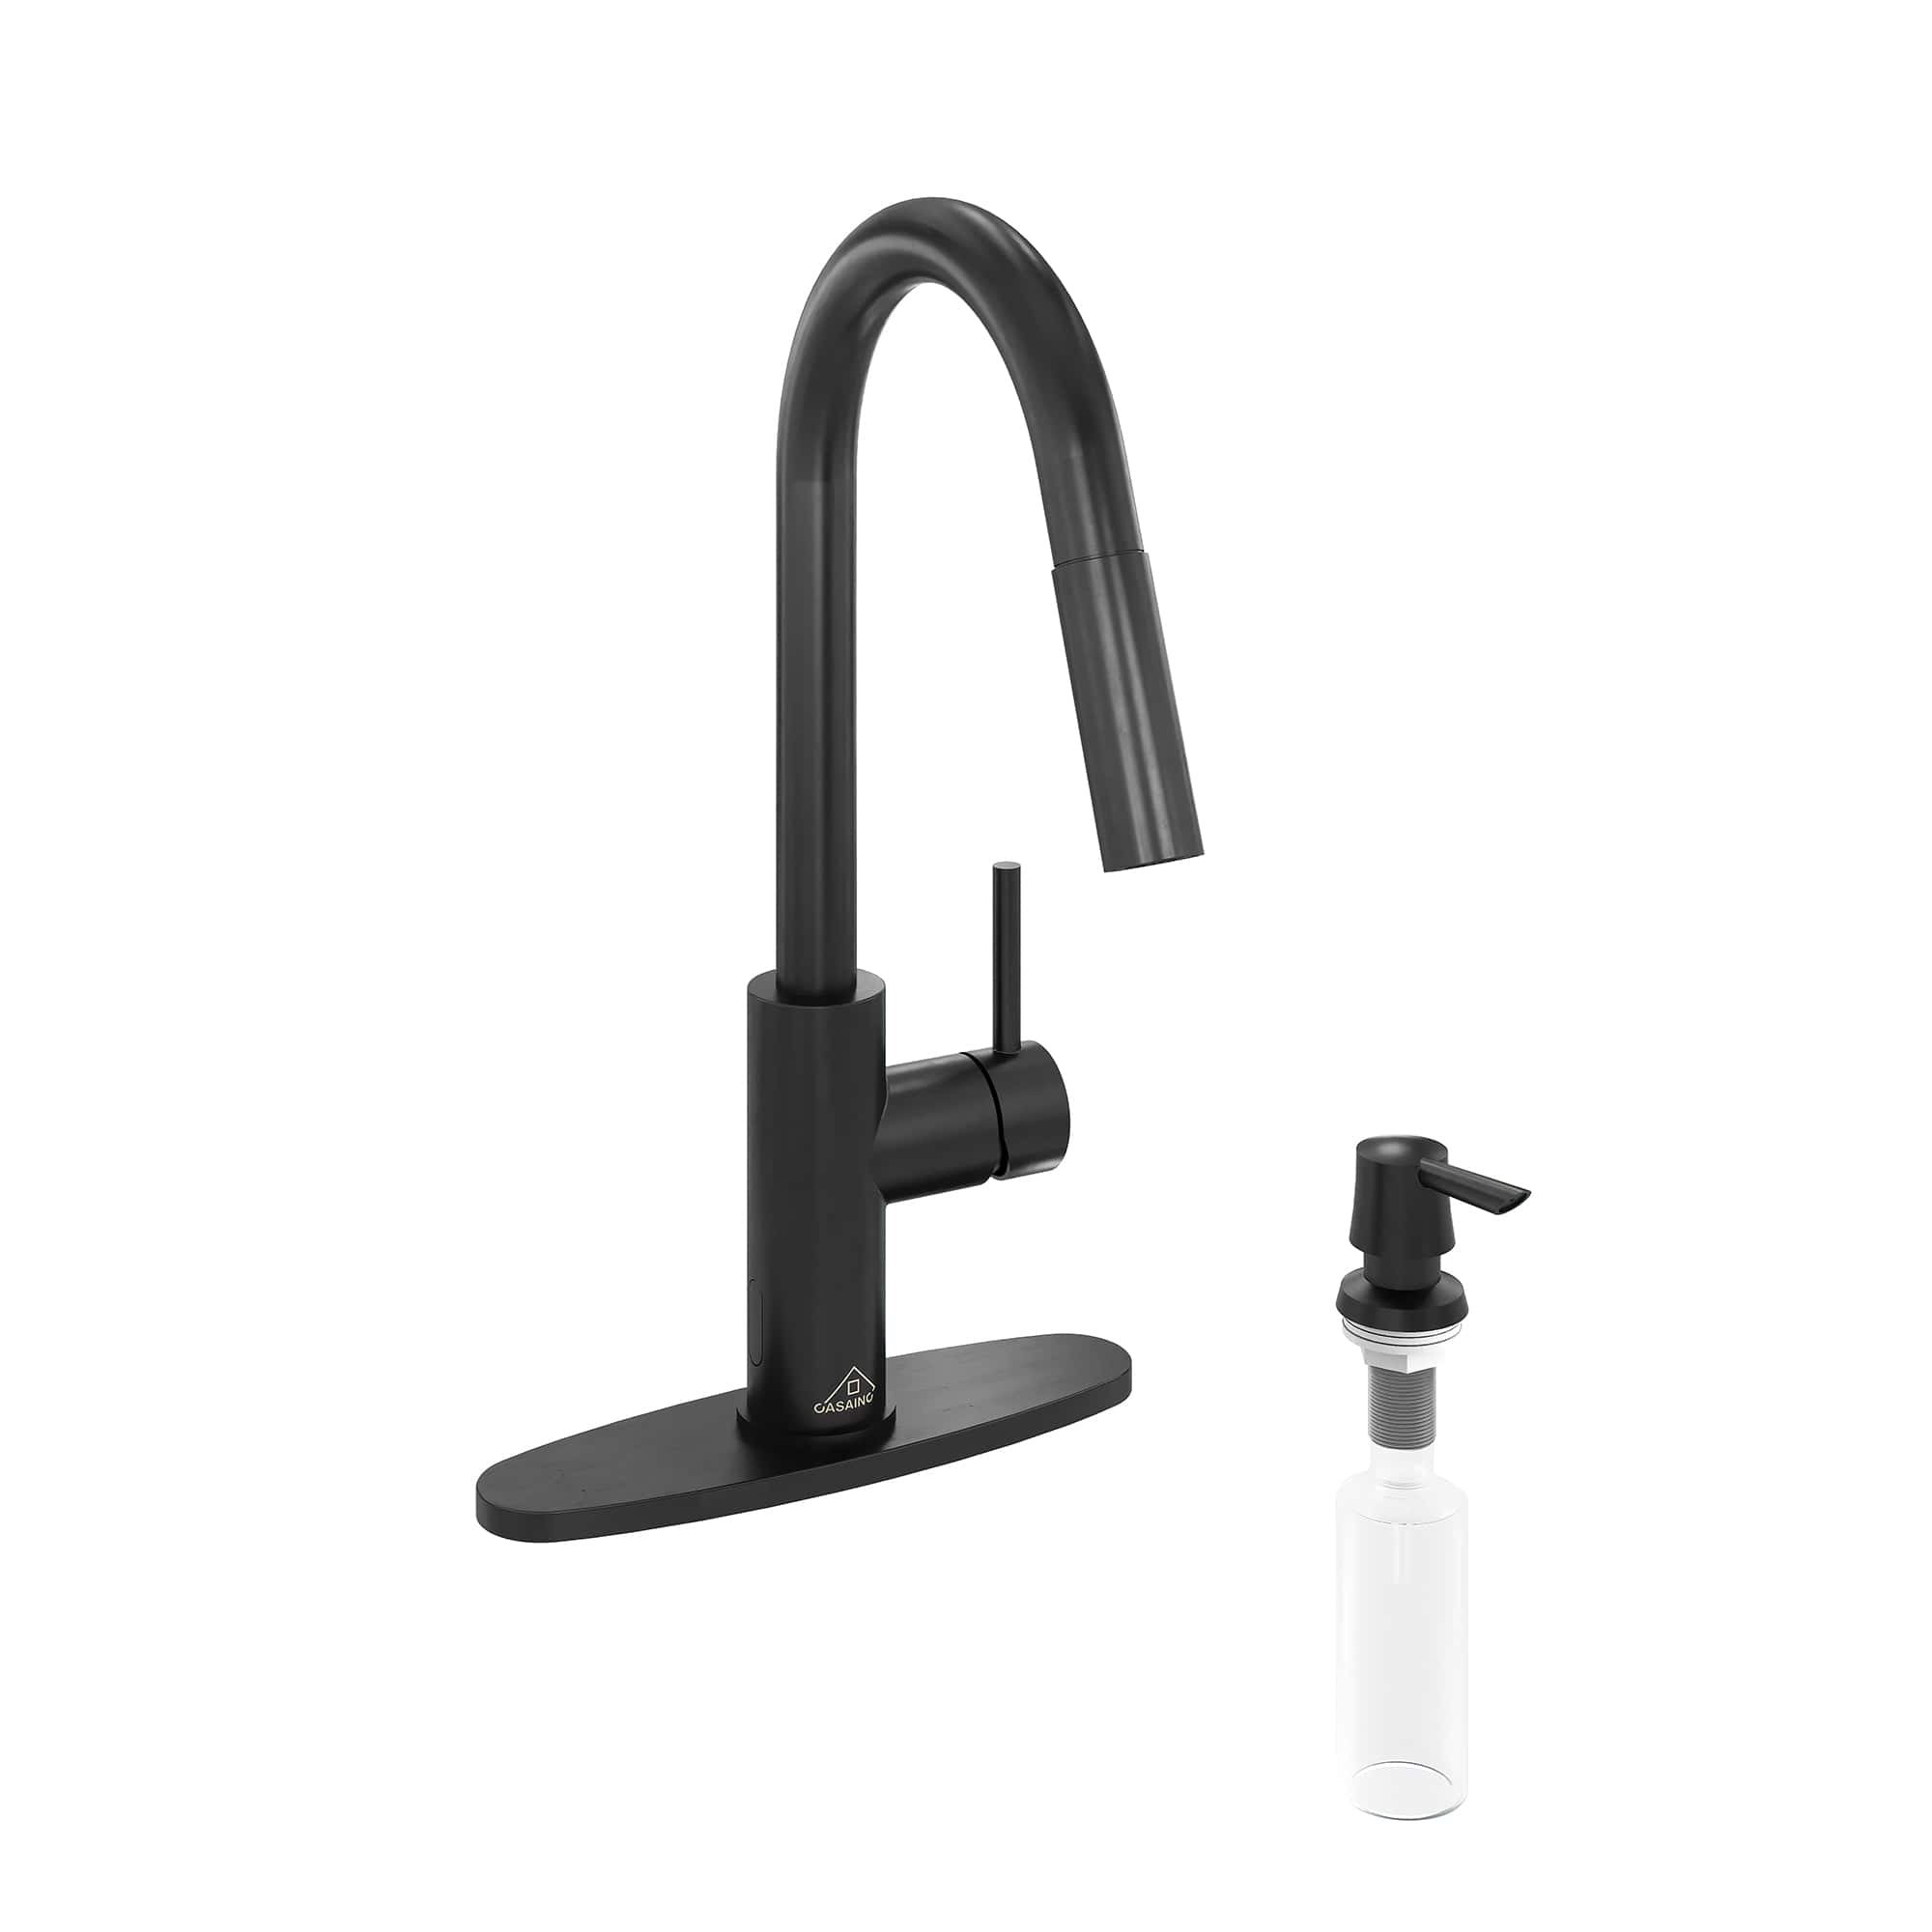 CASAINC 1.8GPM Infrared Induction Pull Kitchen Faucet in Matte Black and More